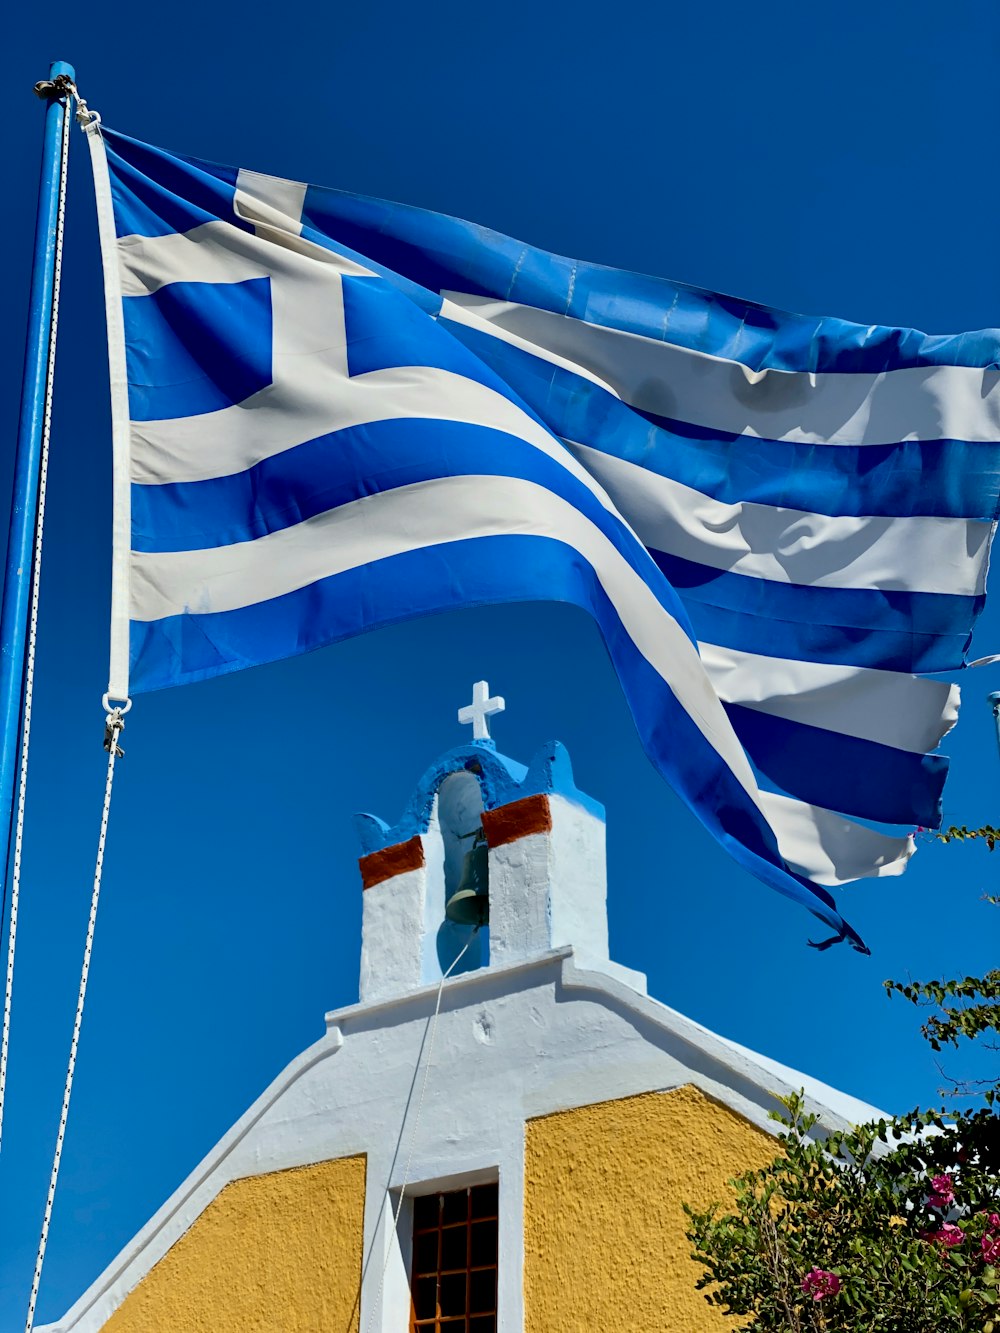 raised Greece flag near cathedral during daytime